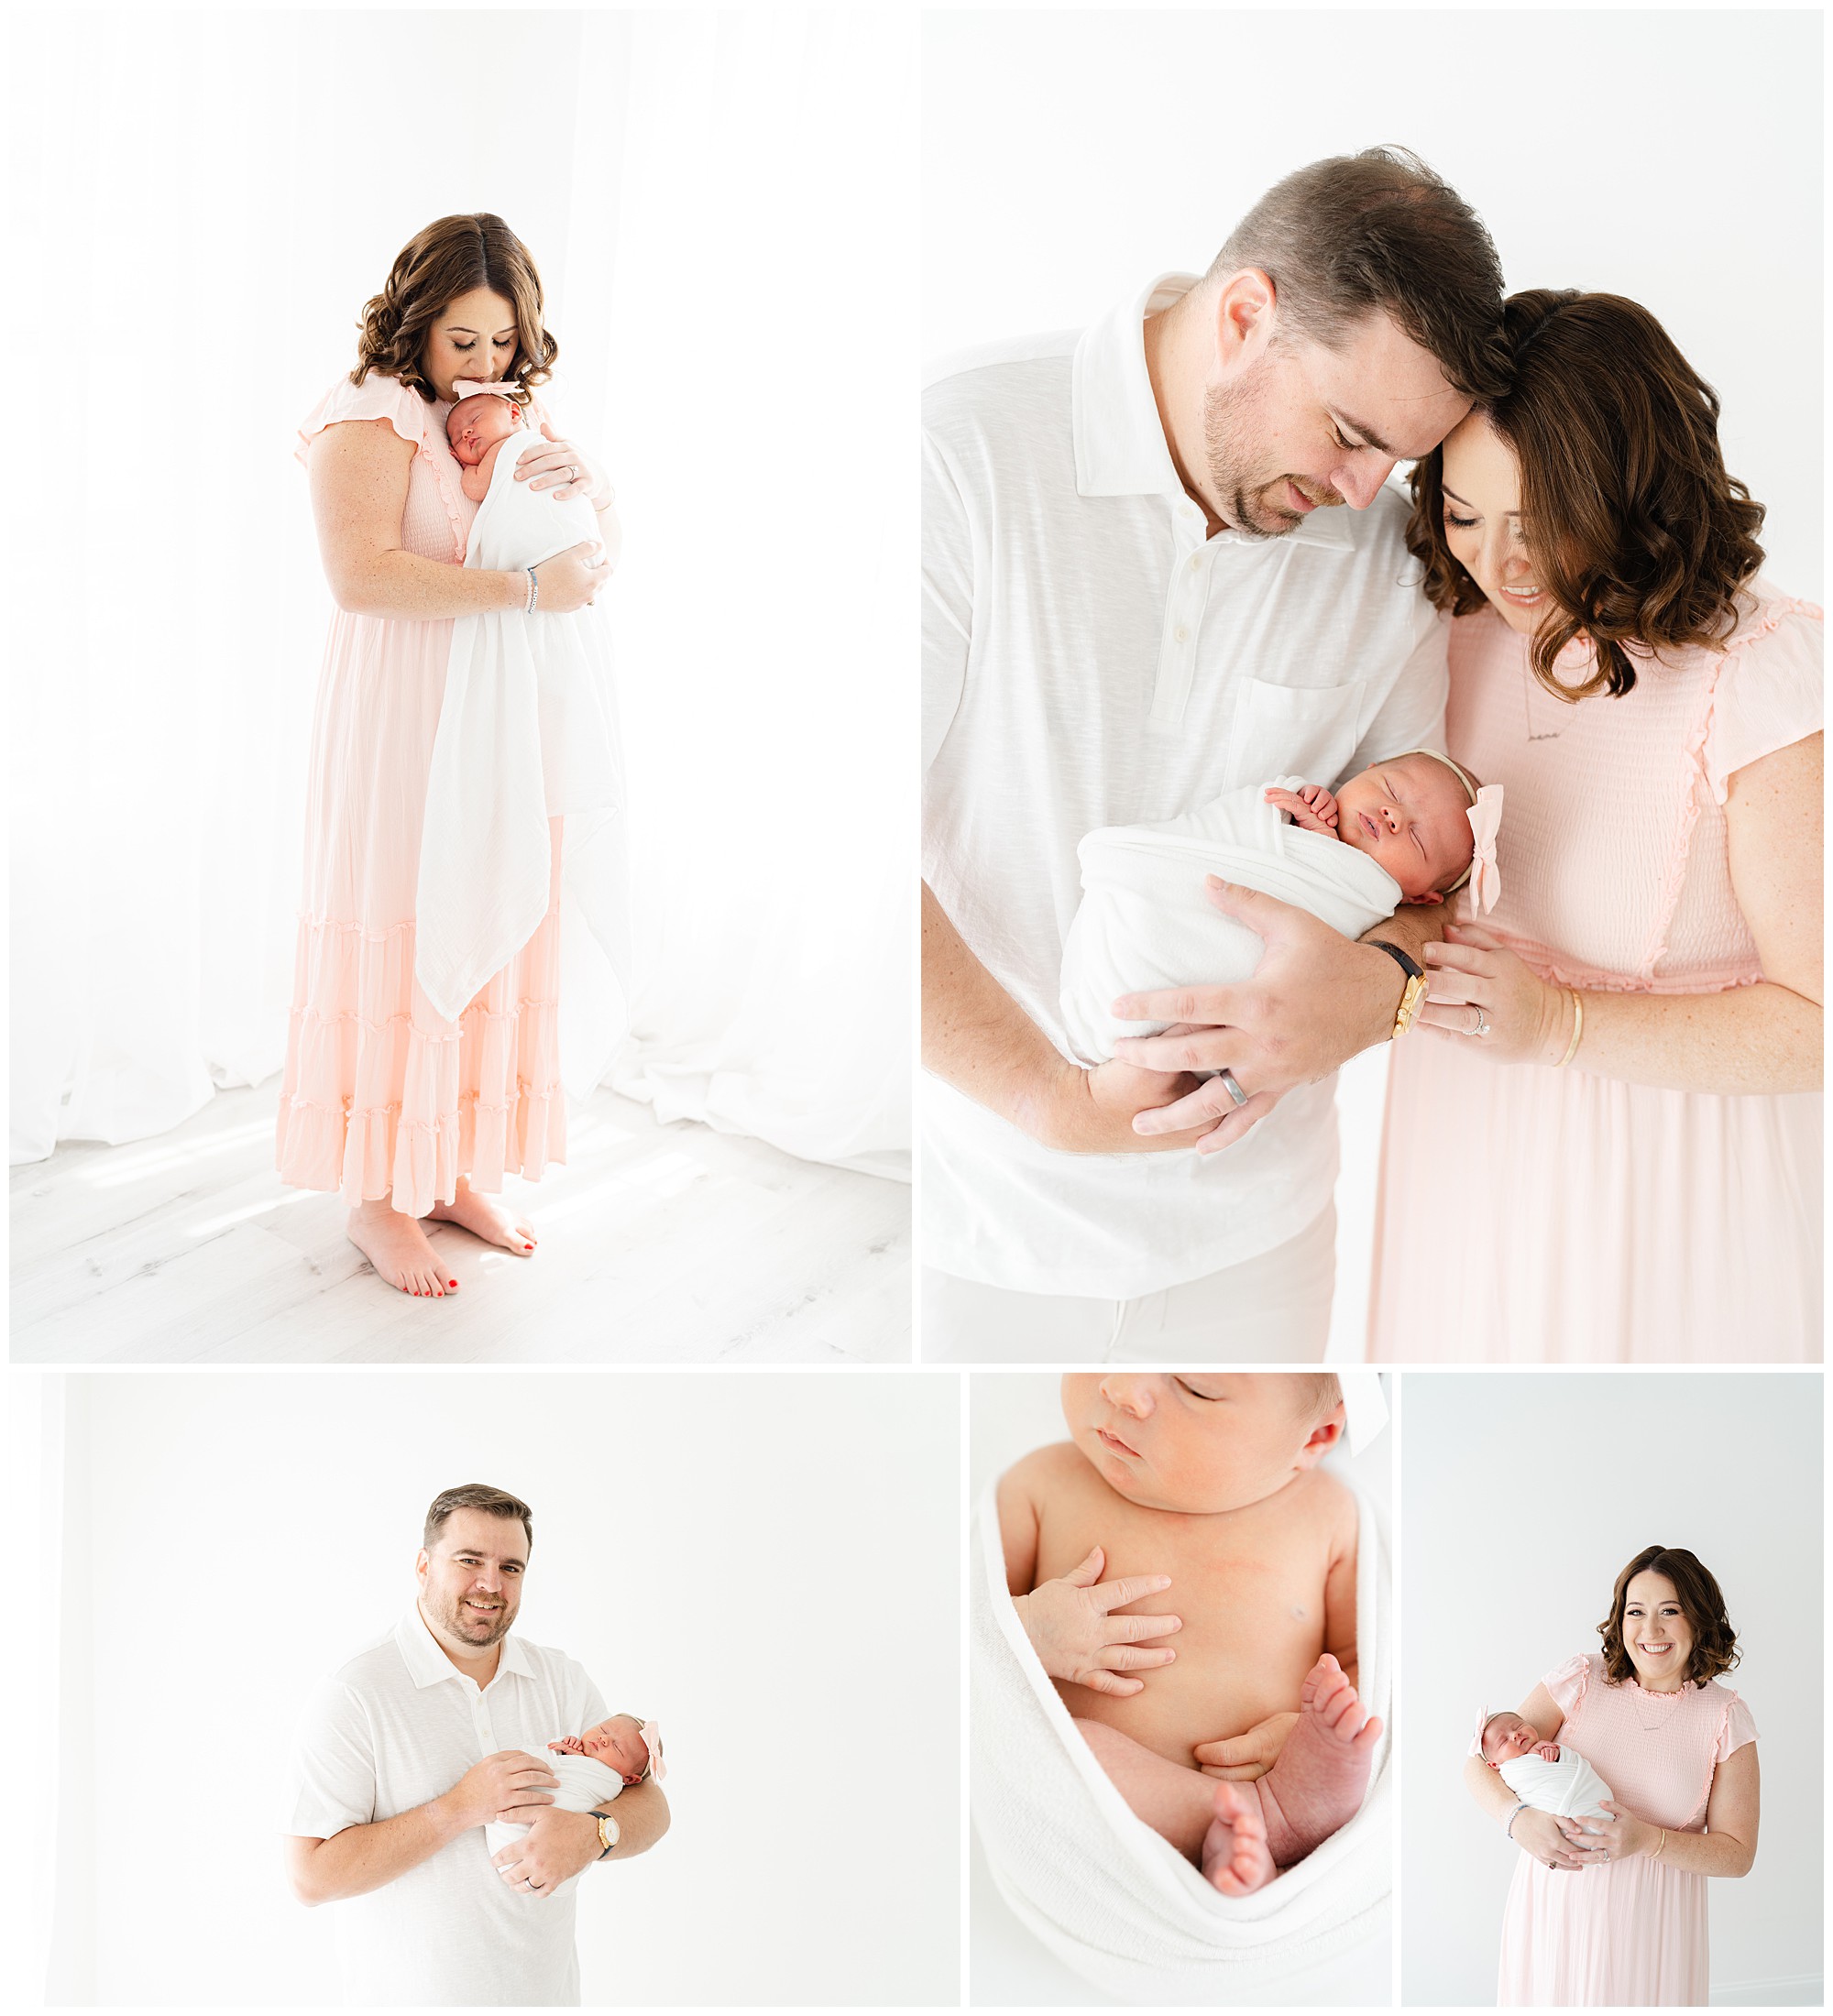 Five images together showing parents and their baby girl during a newborn photo session in a white studio space.